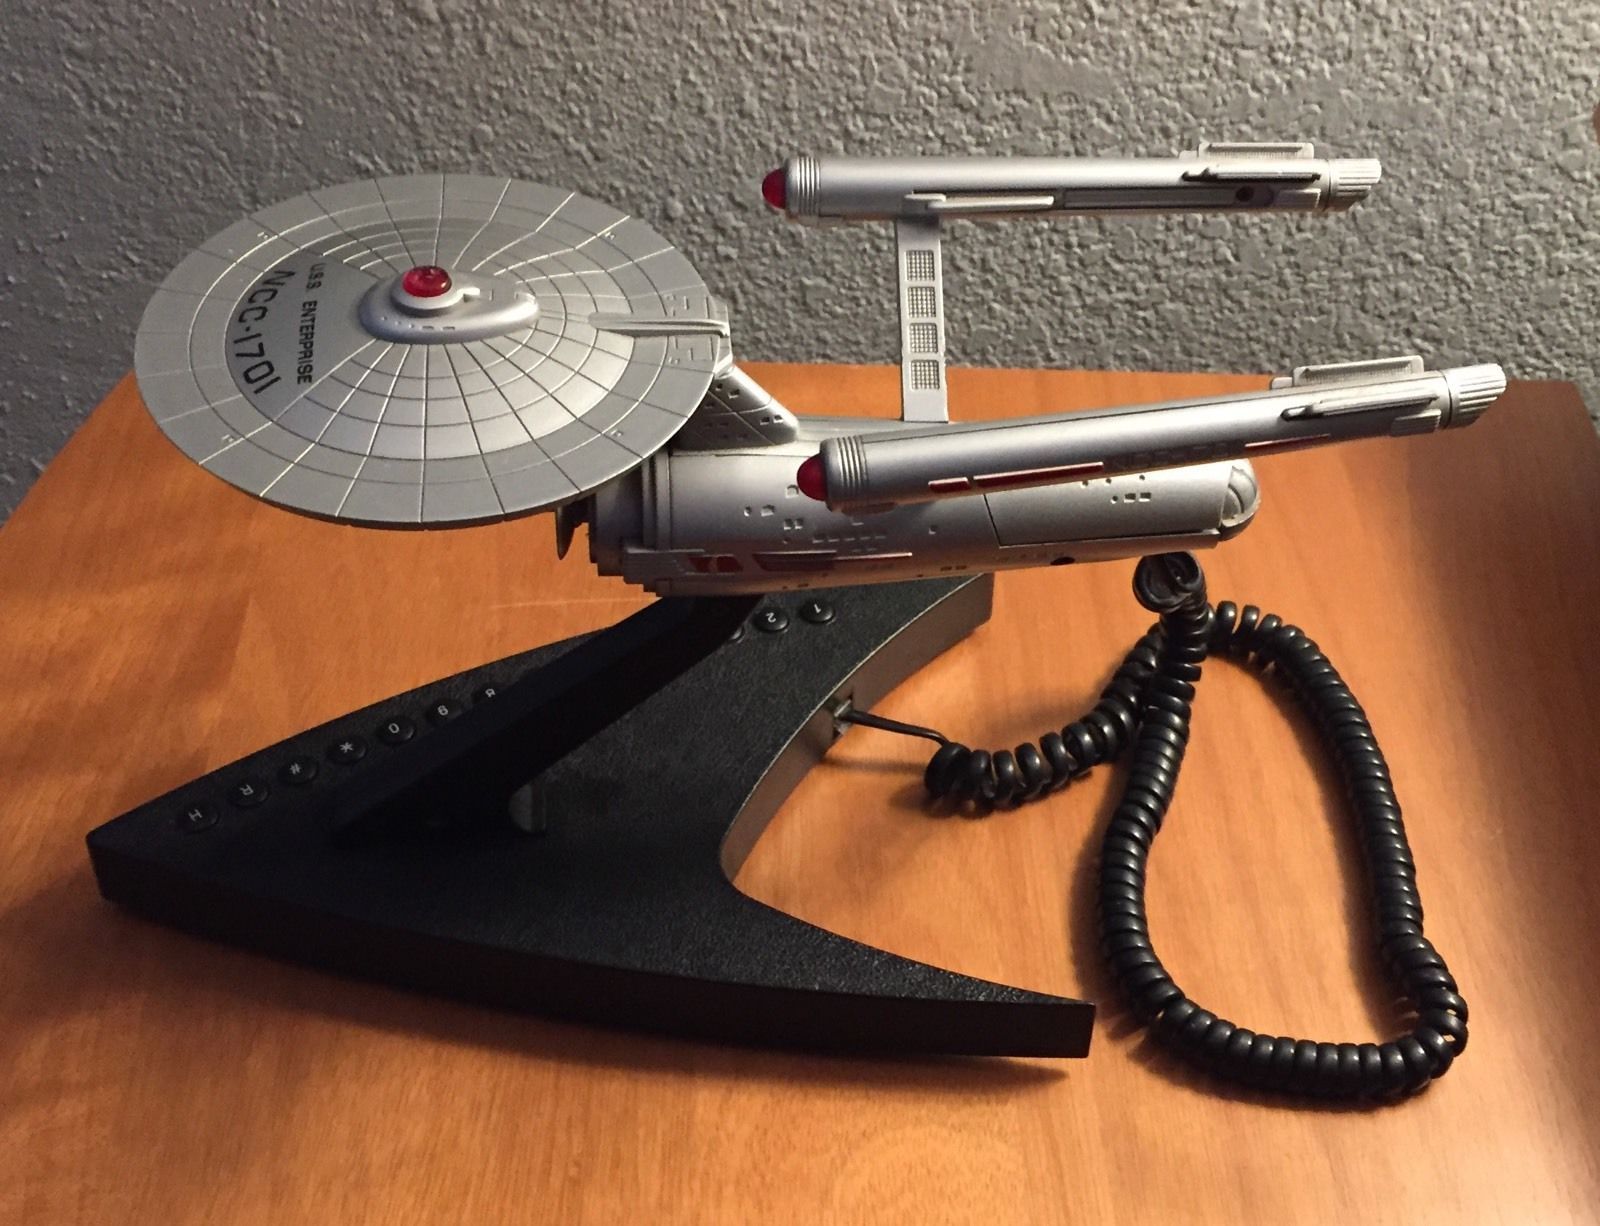 star trek in real life best starfleet gadgets and toys you can buy image 5